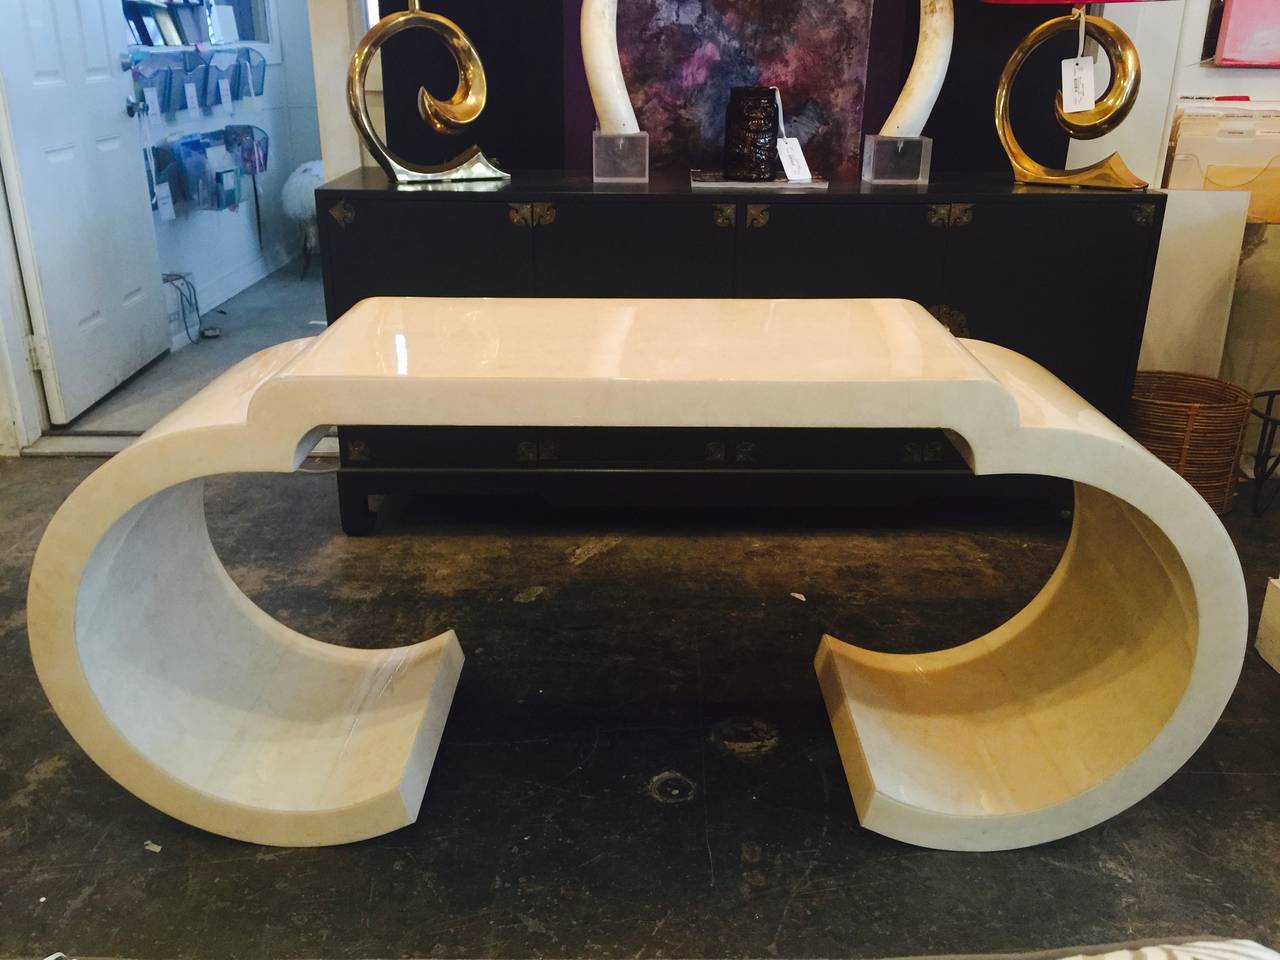 Parchment style console with faux skin finish. The console has lacquer finish.
circa. 1970s 

dimensions: 65